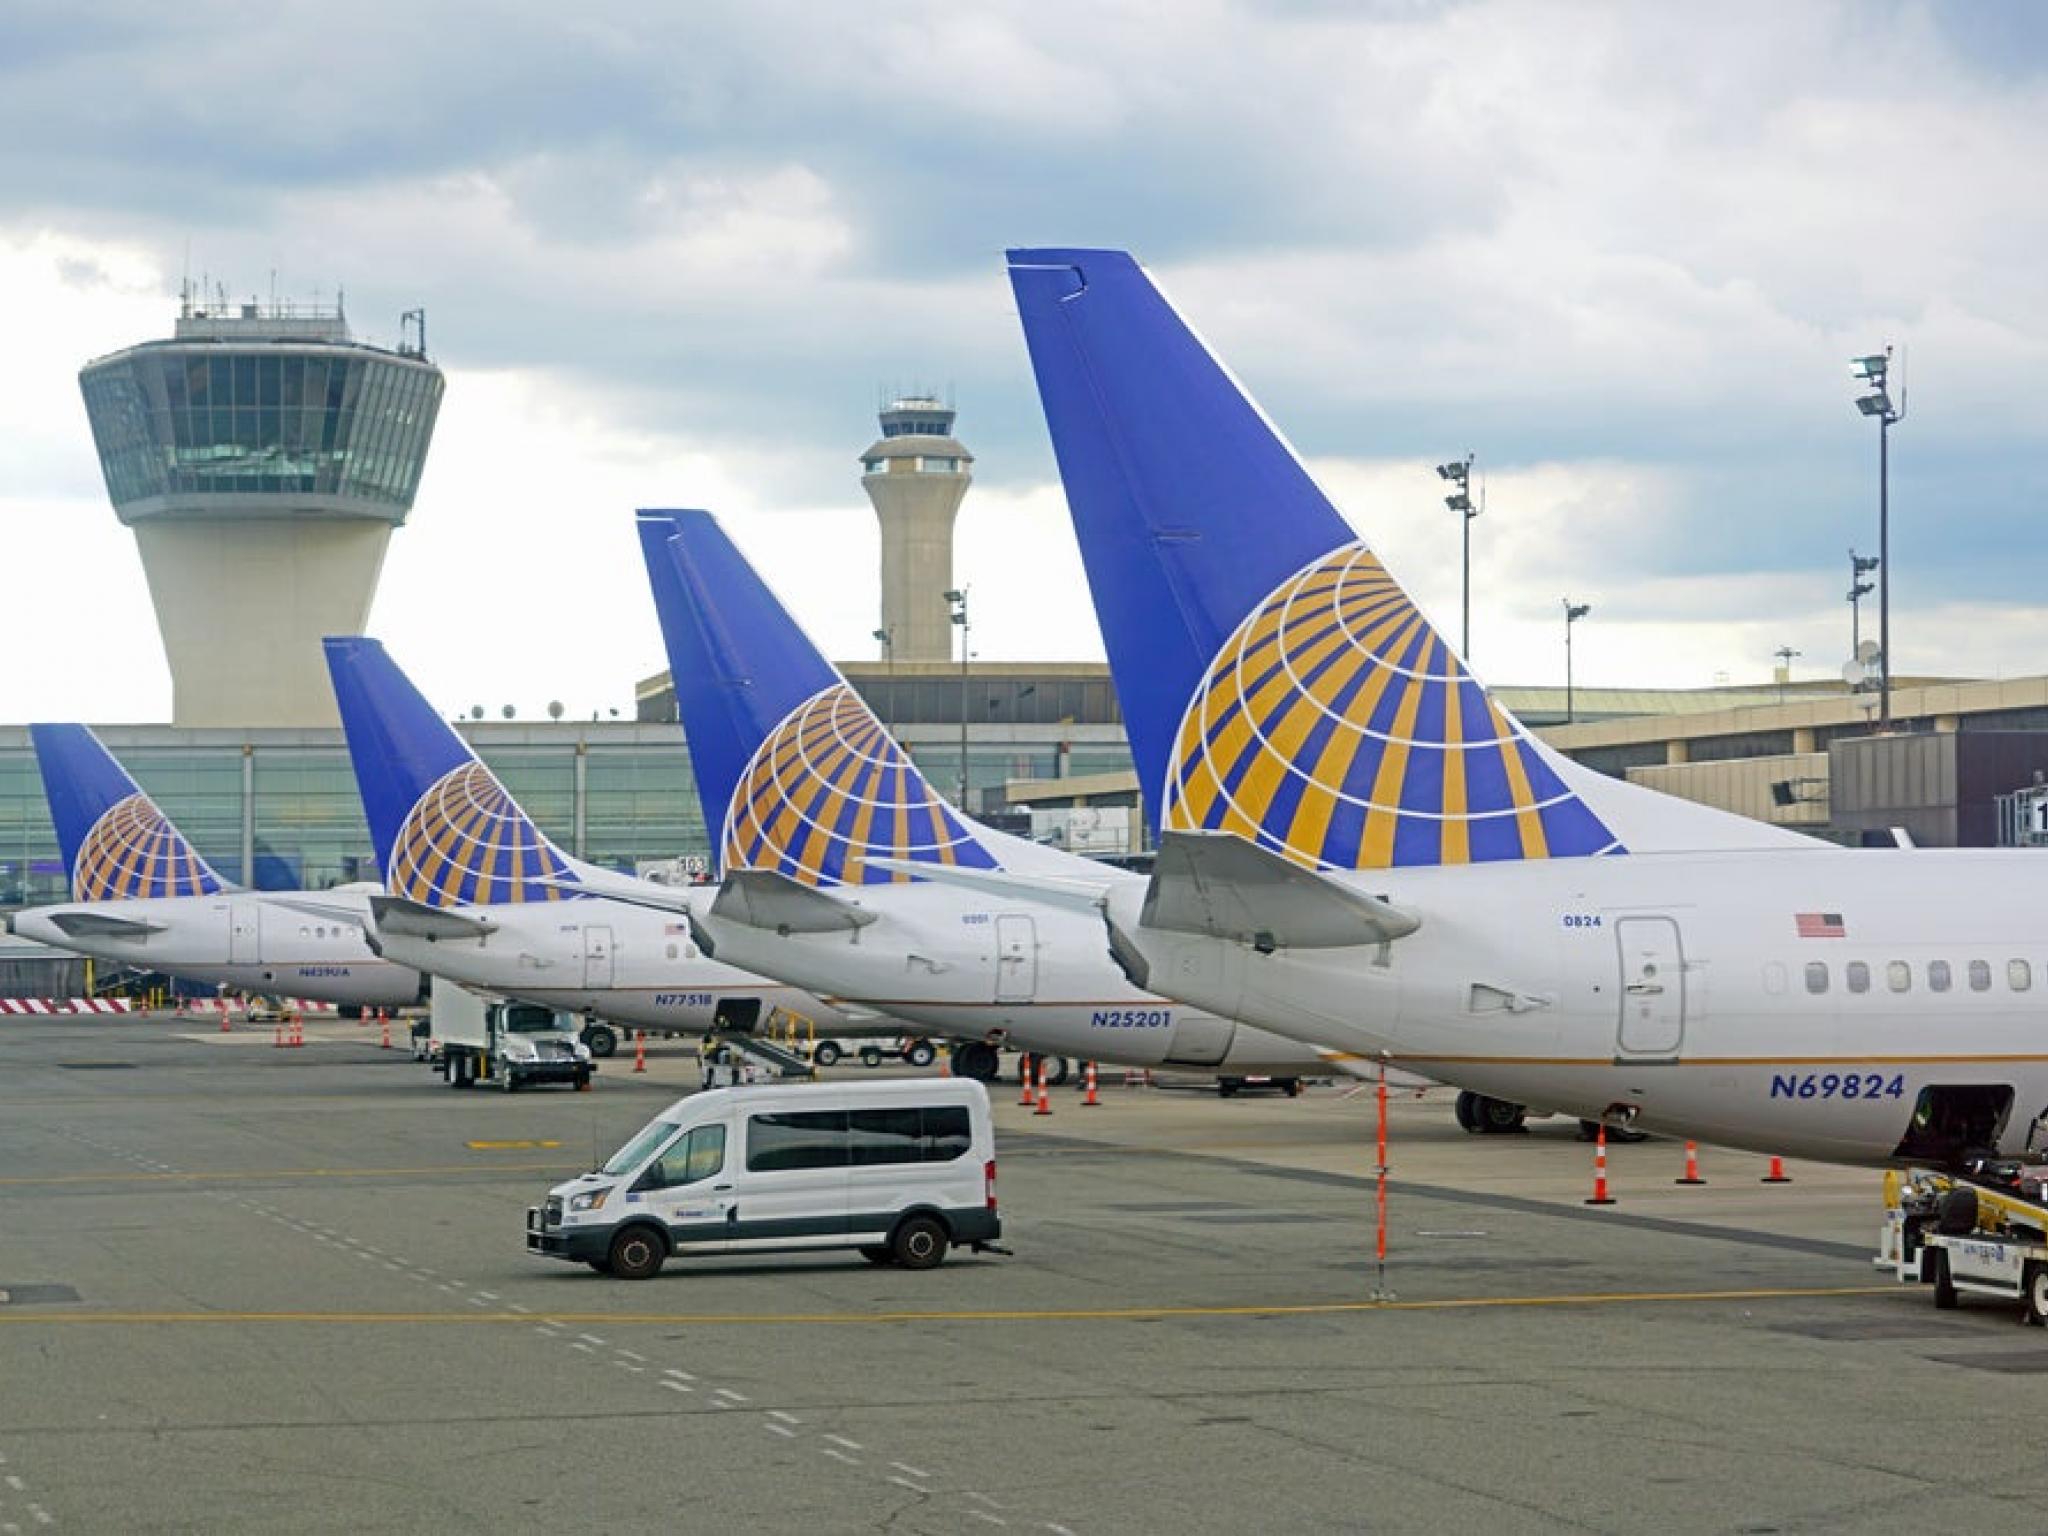  this-united-airlines-analyst-turns-bullish-here-are-top-5-upgrades-for-thursday 